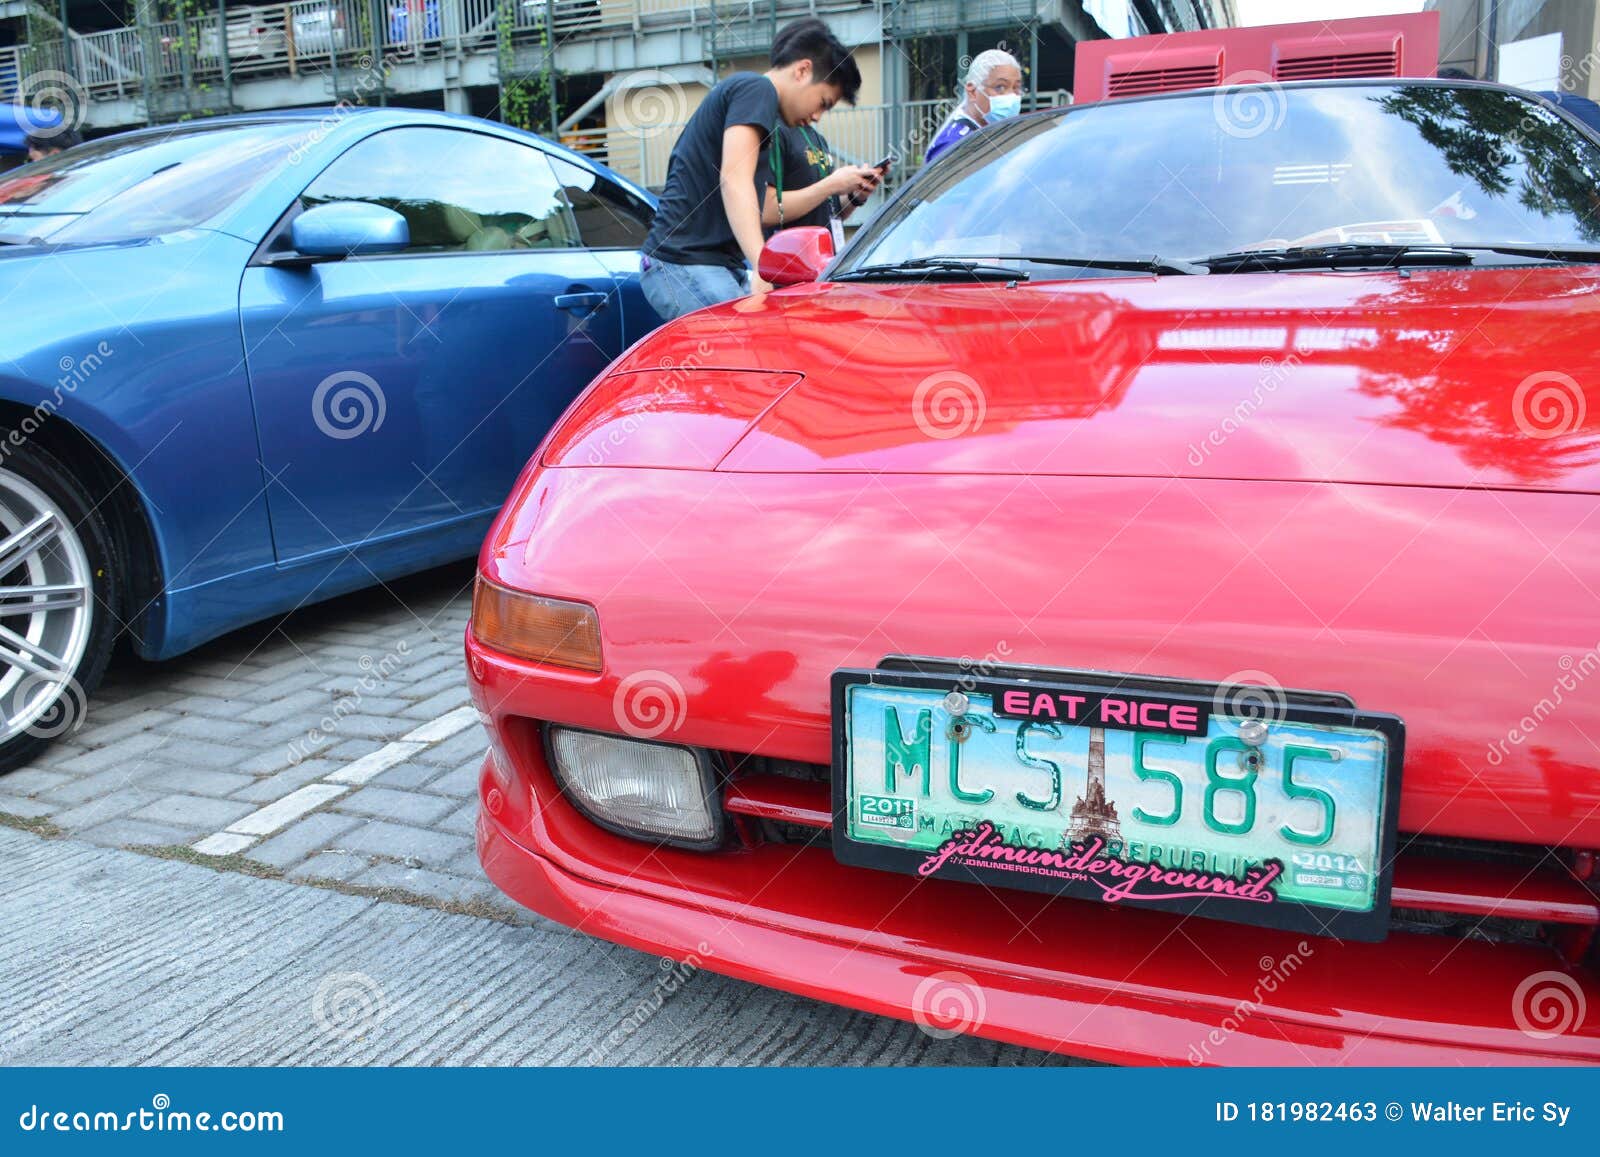 Toyota Mr2 Sw Gts In Quezon City Philippines Editorial Stock Photo Image Of City Expo